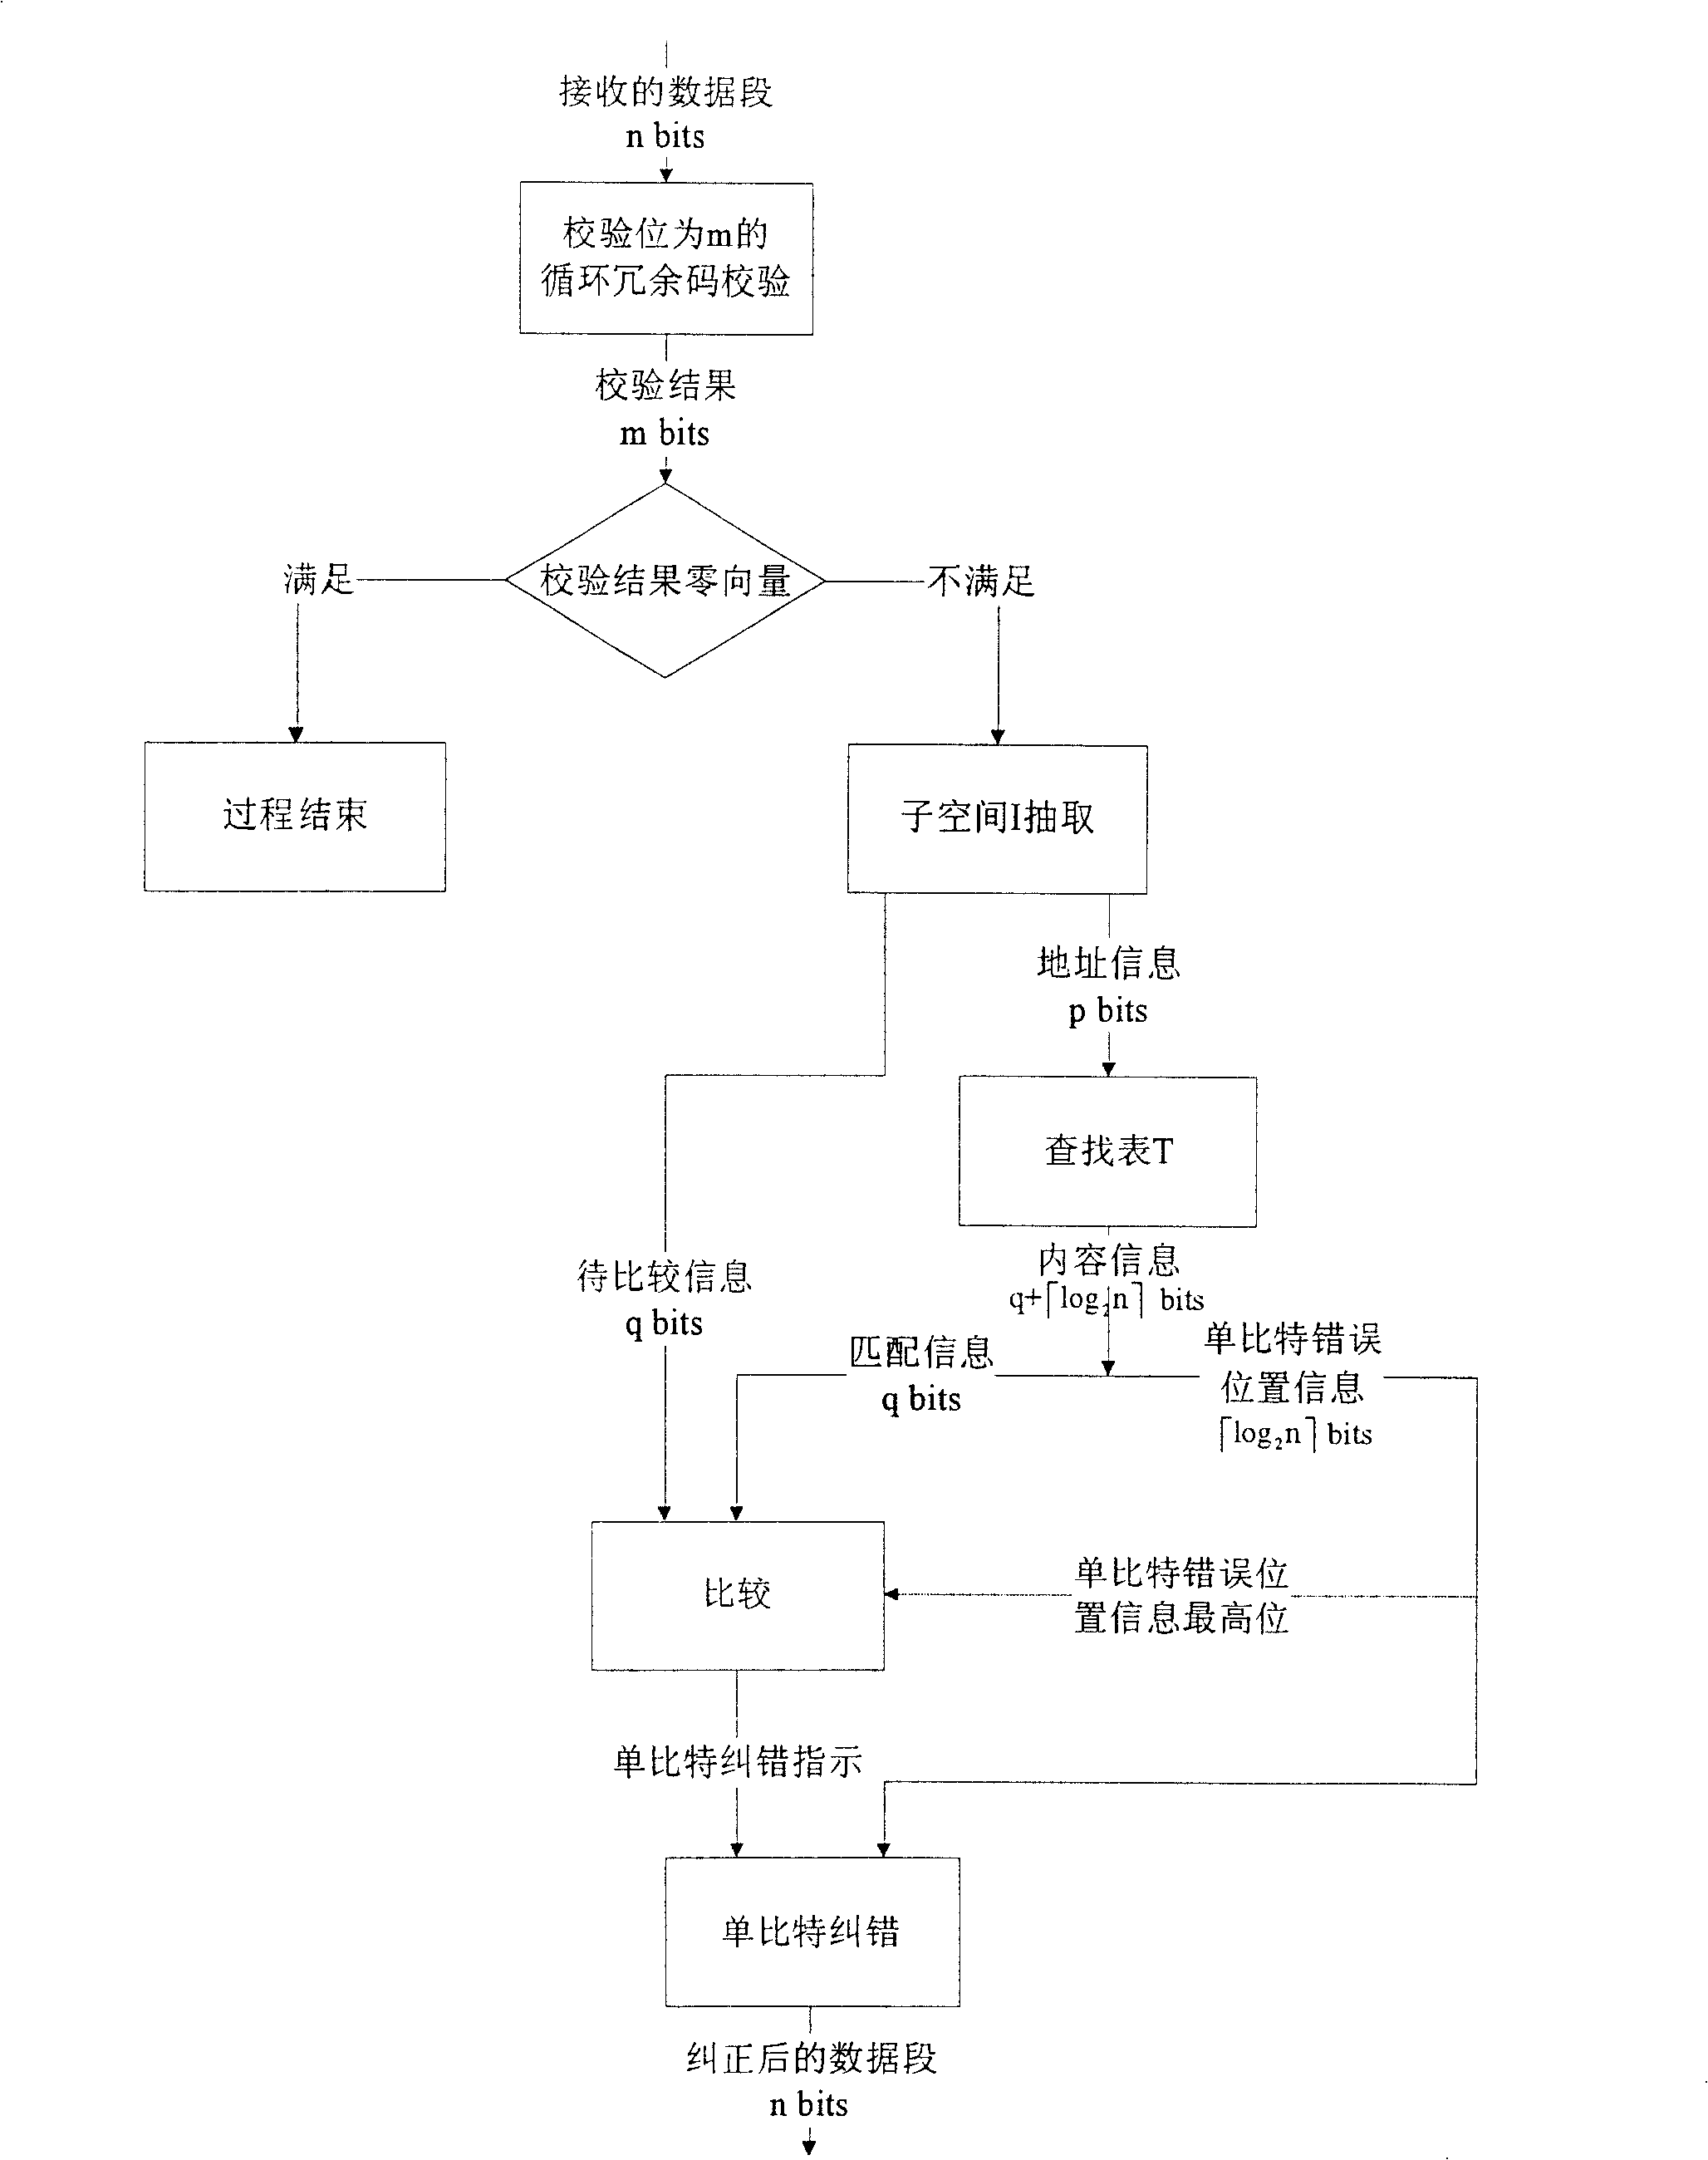 Single-bit error correction and form-checking method based on CRC and its circuit